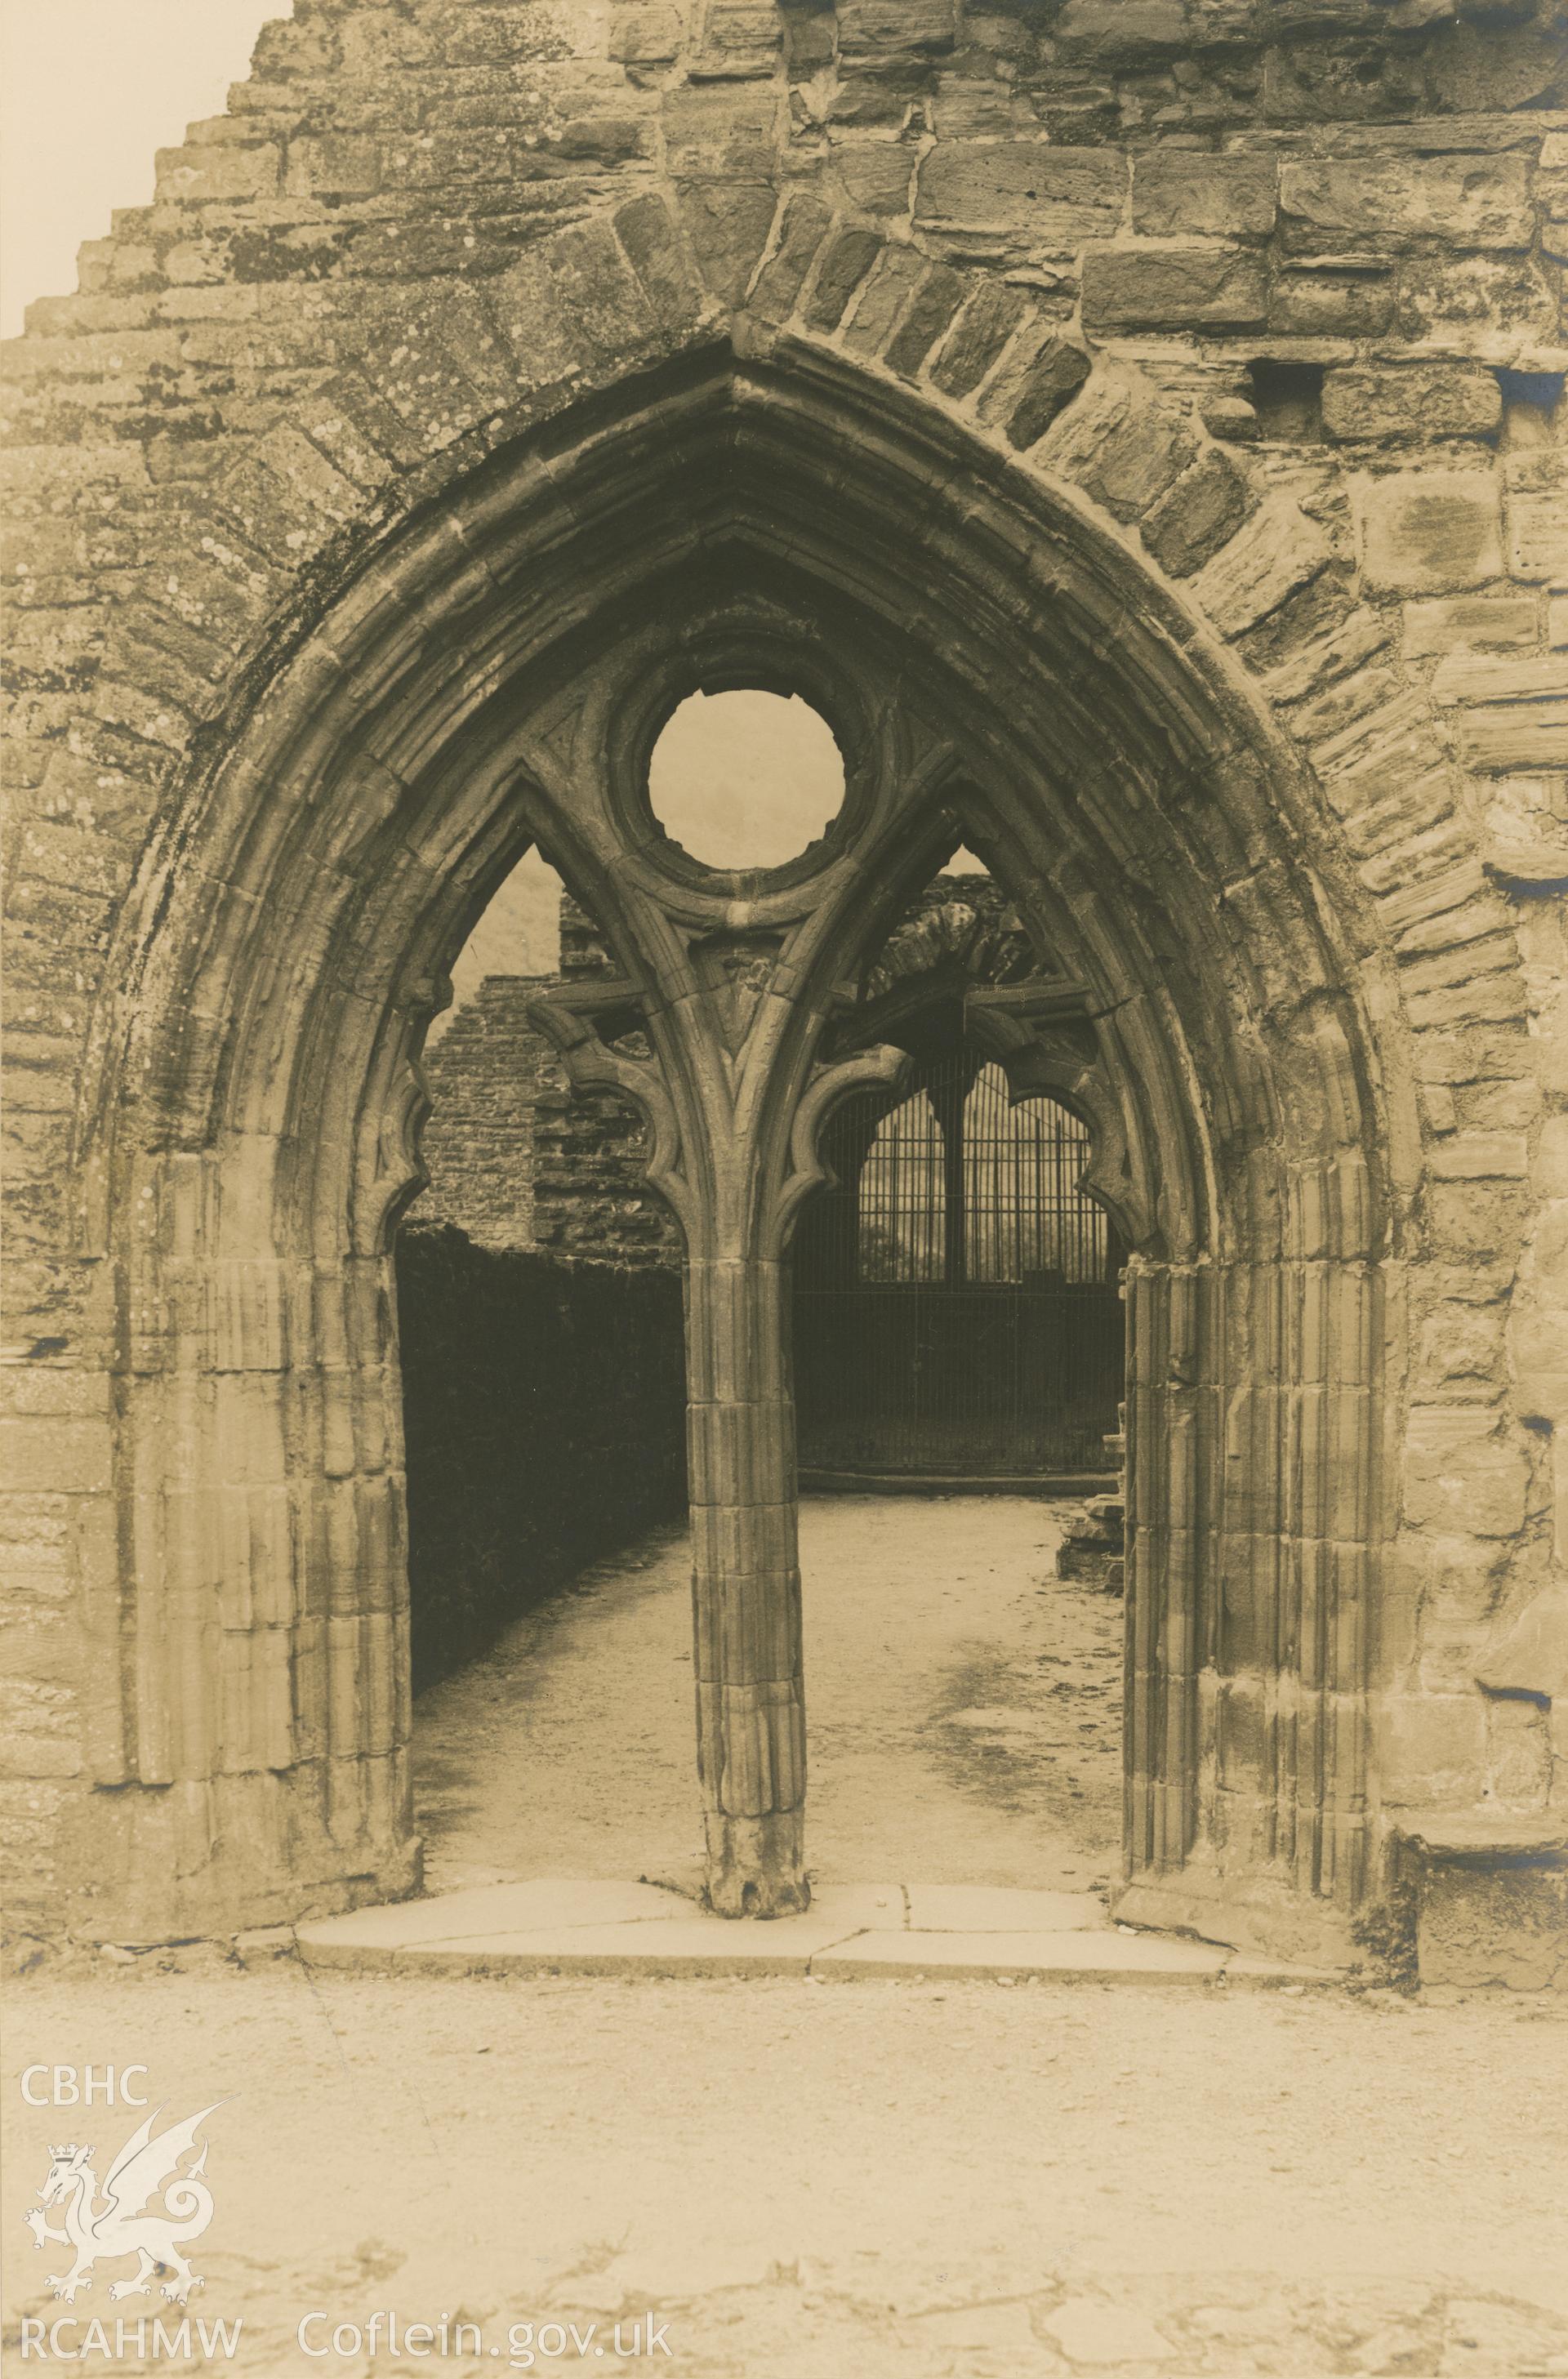 Digital copy of a view of the sacristry doorway to the cloisters at Tintern Abbey.